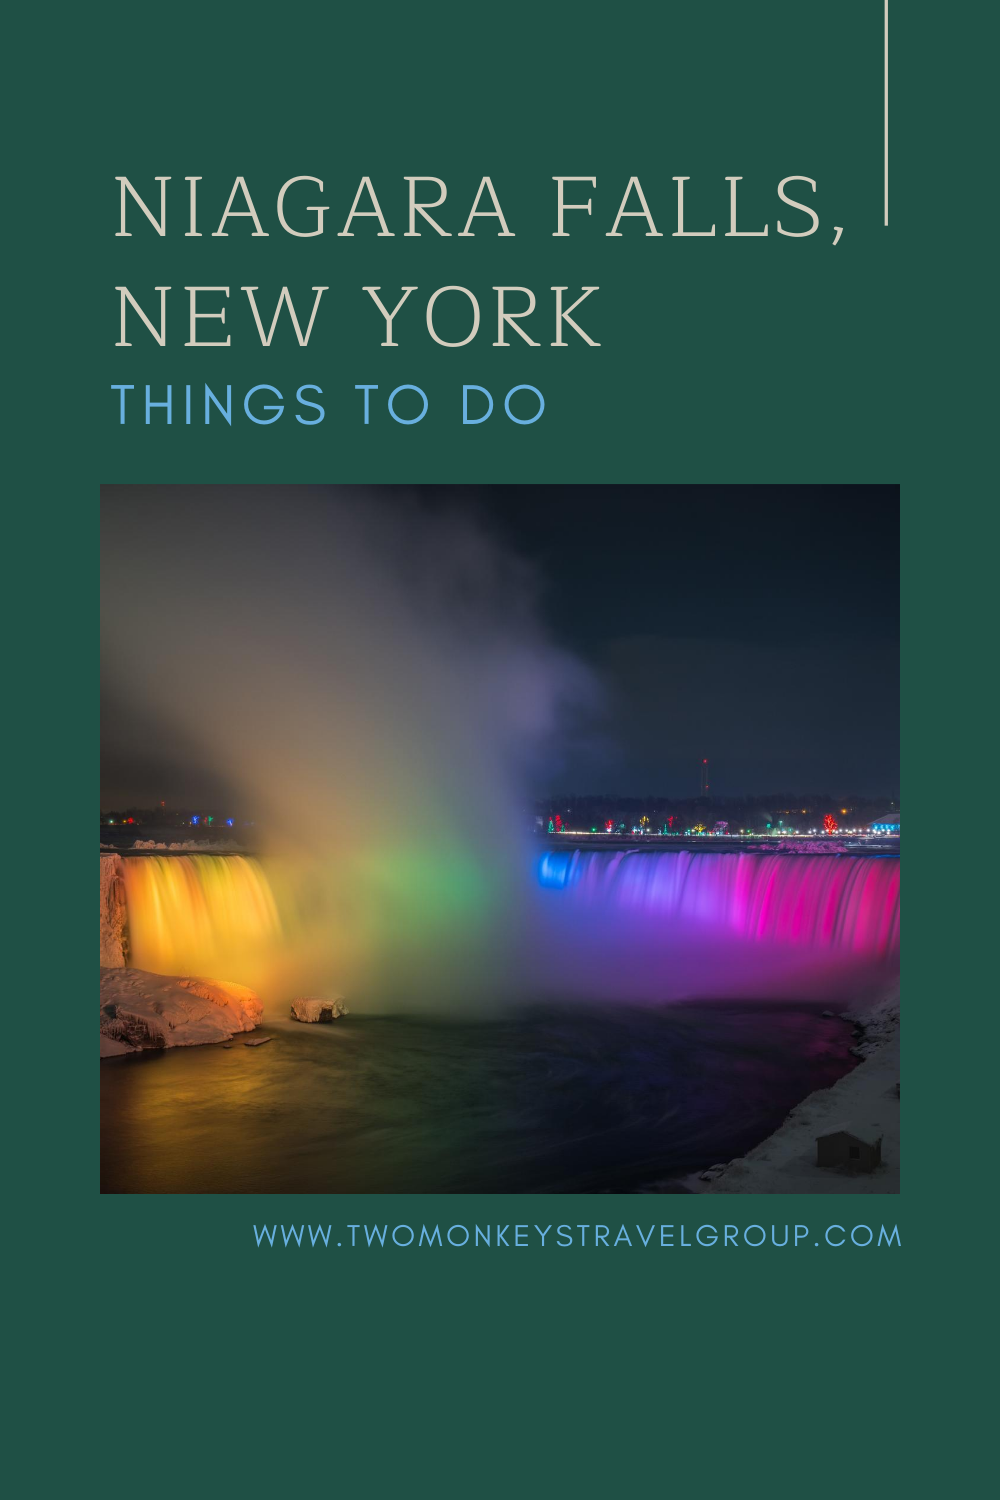 15 Things to do in Niagara Falls, New York [With Suggested Tours]